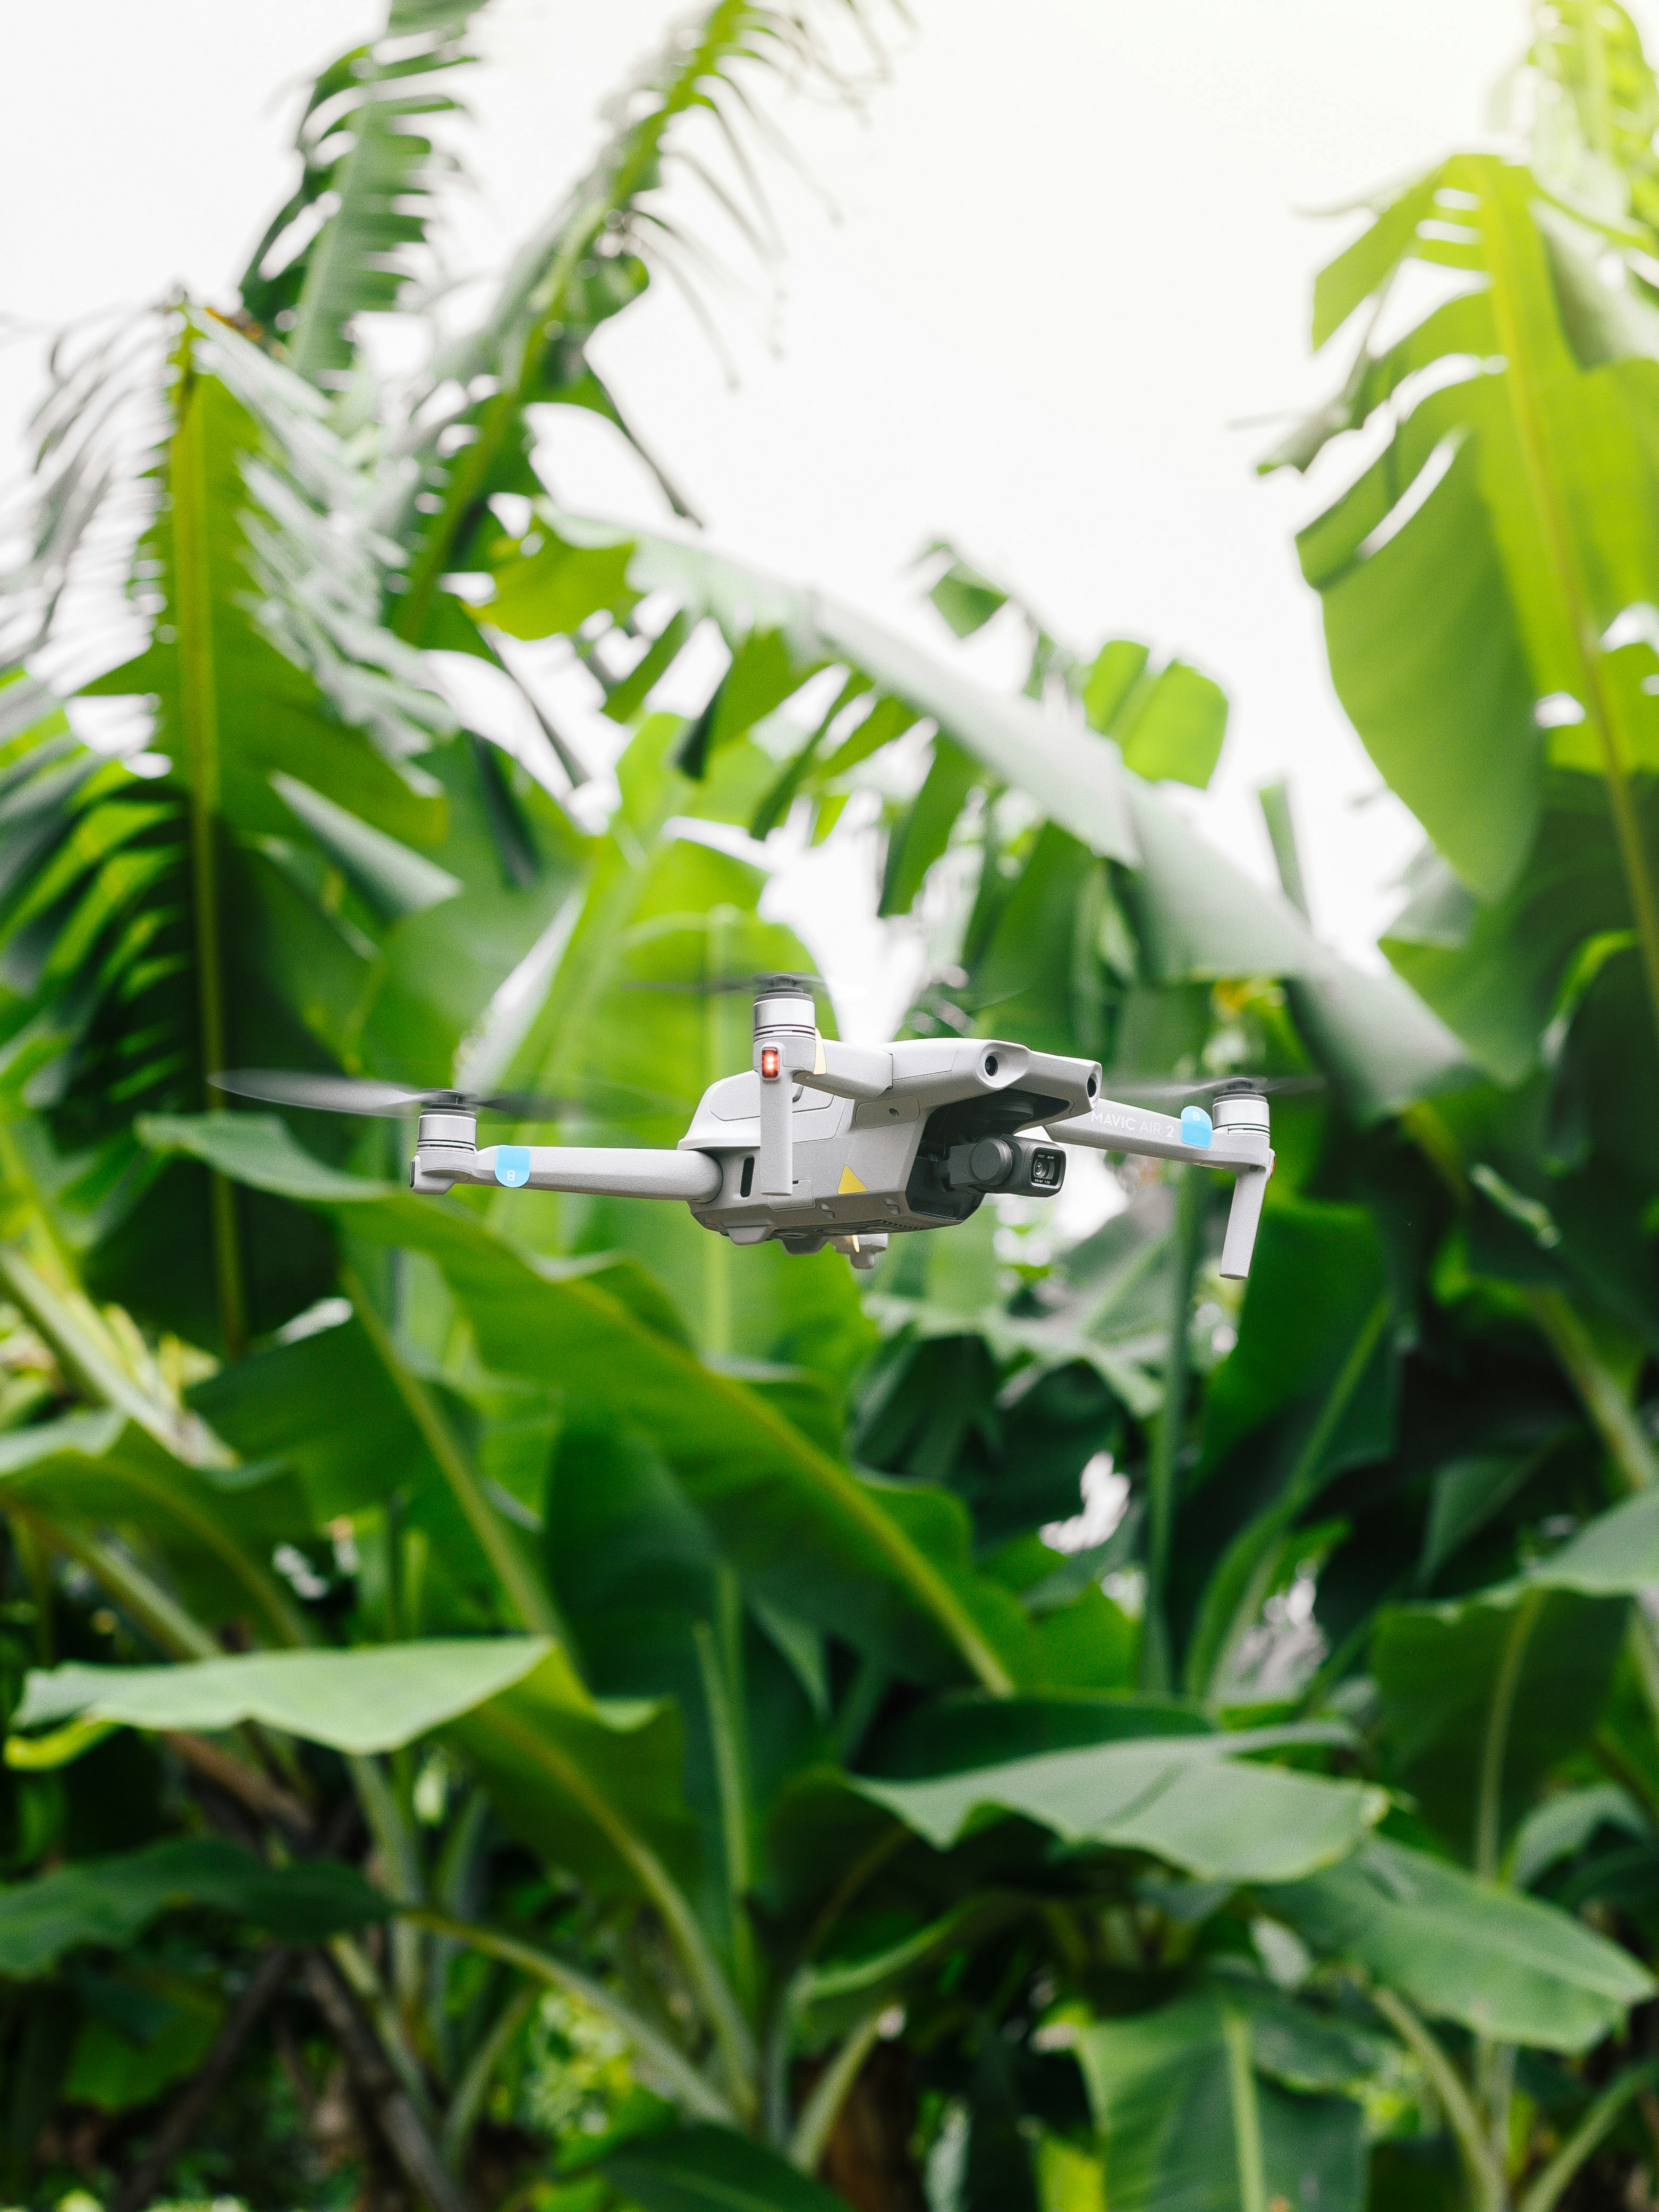 gray and black drone on green plant during daytime